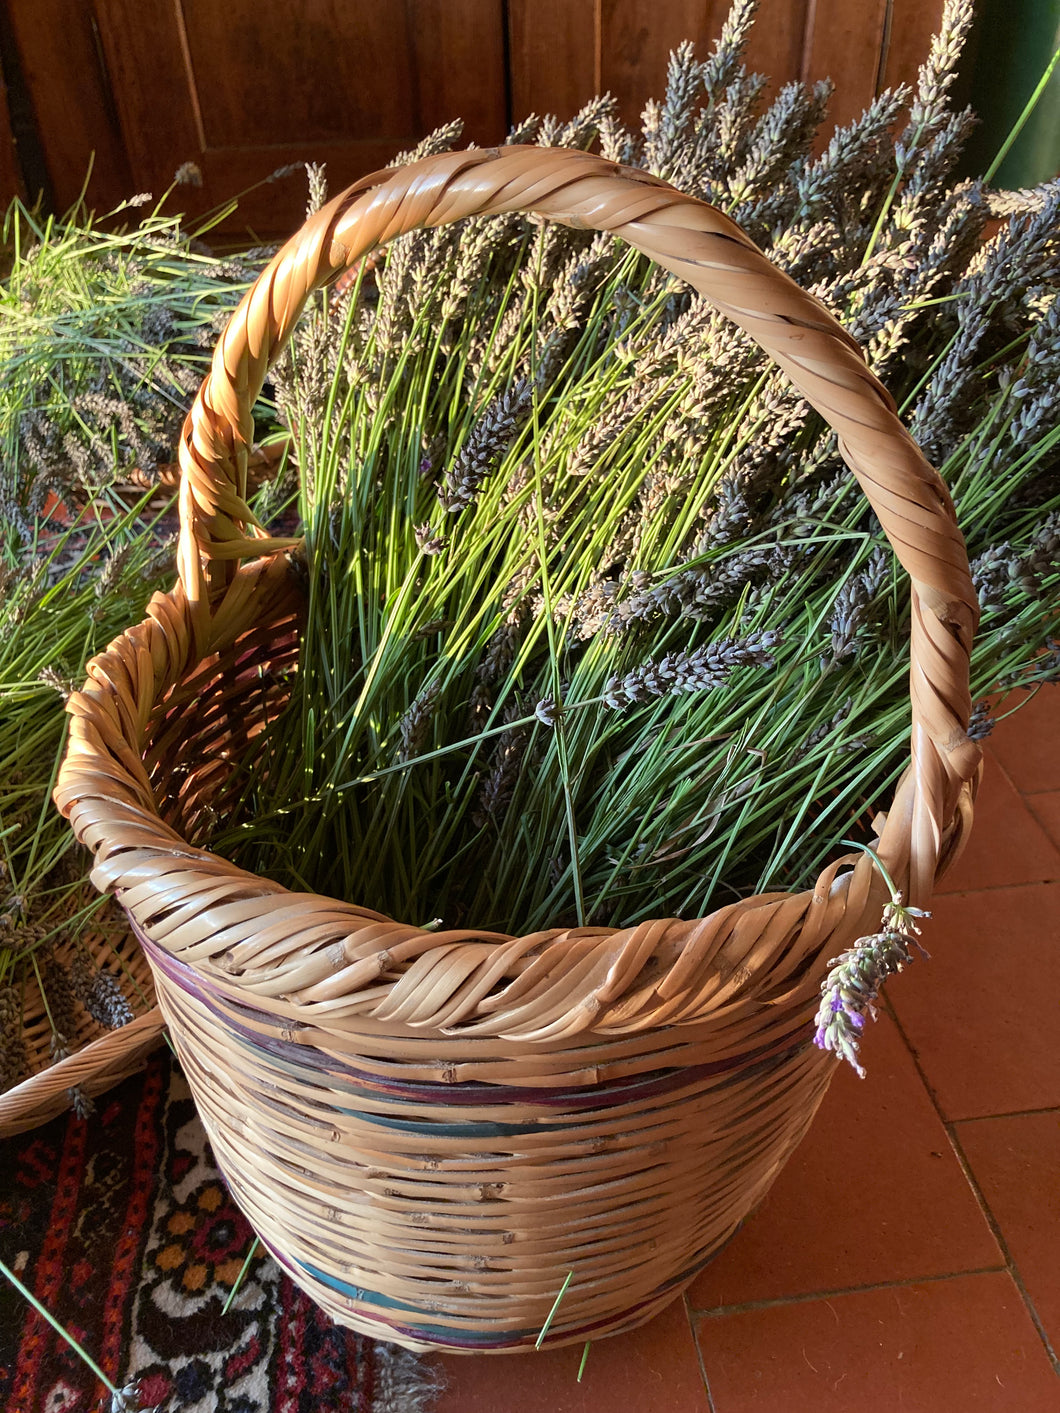 A large rustic woven basket